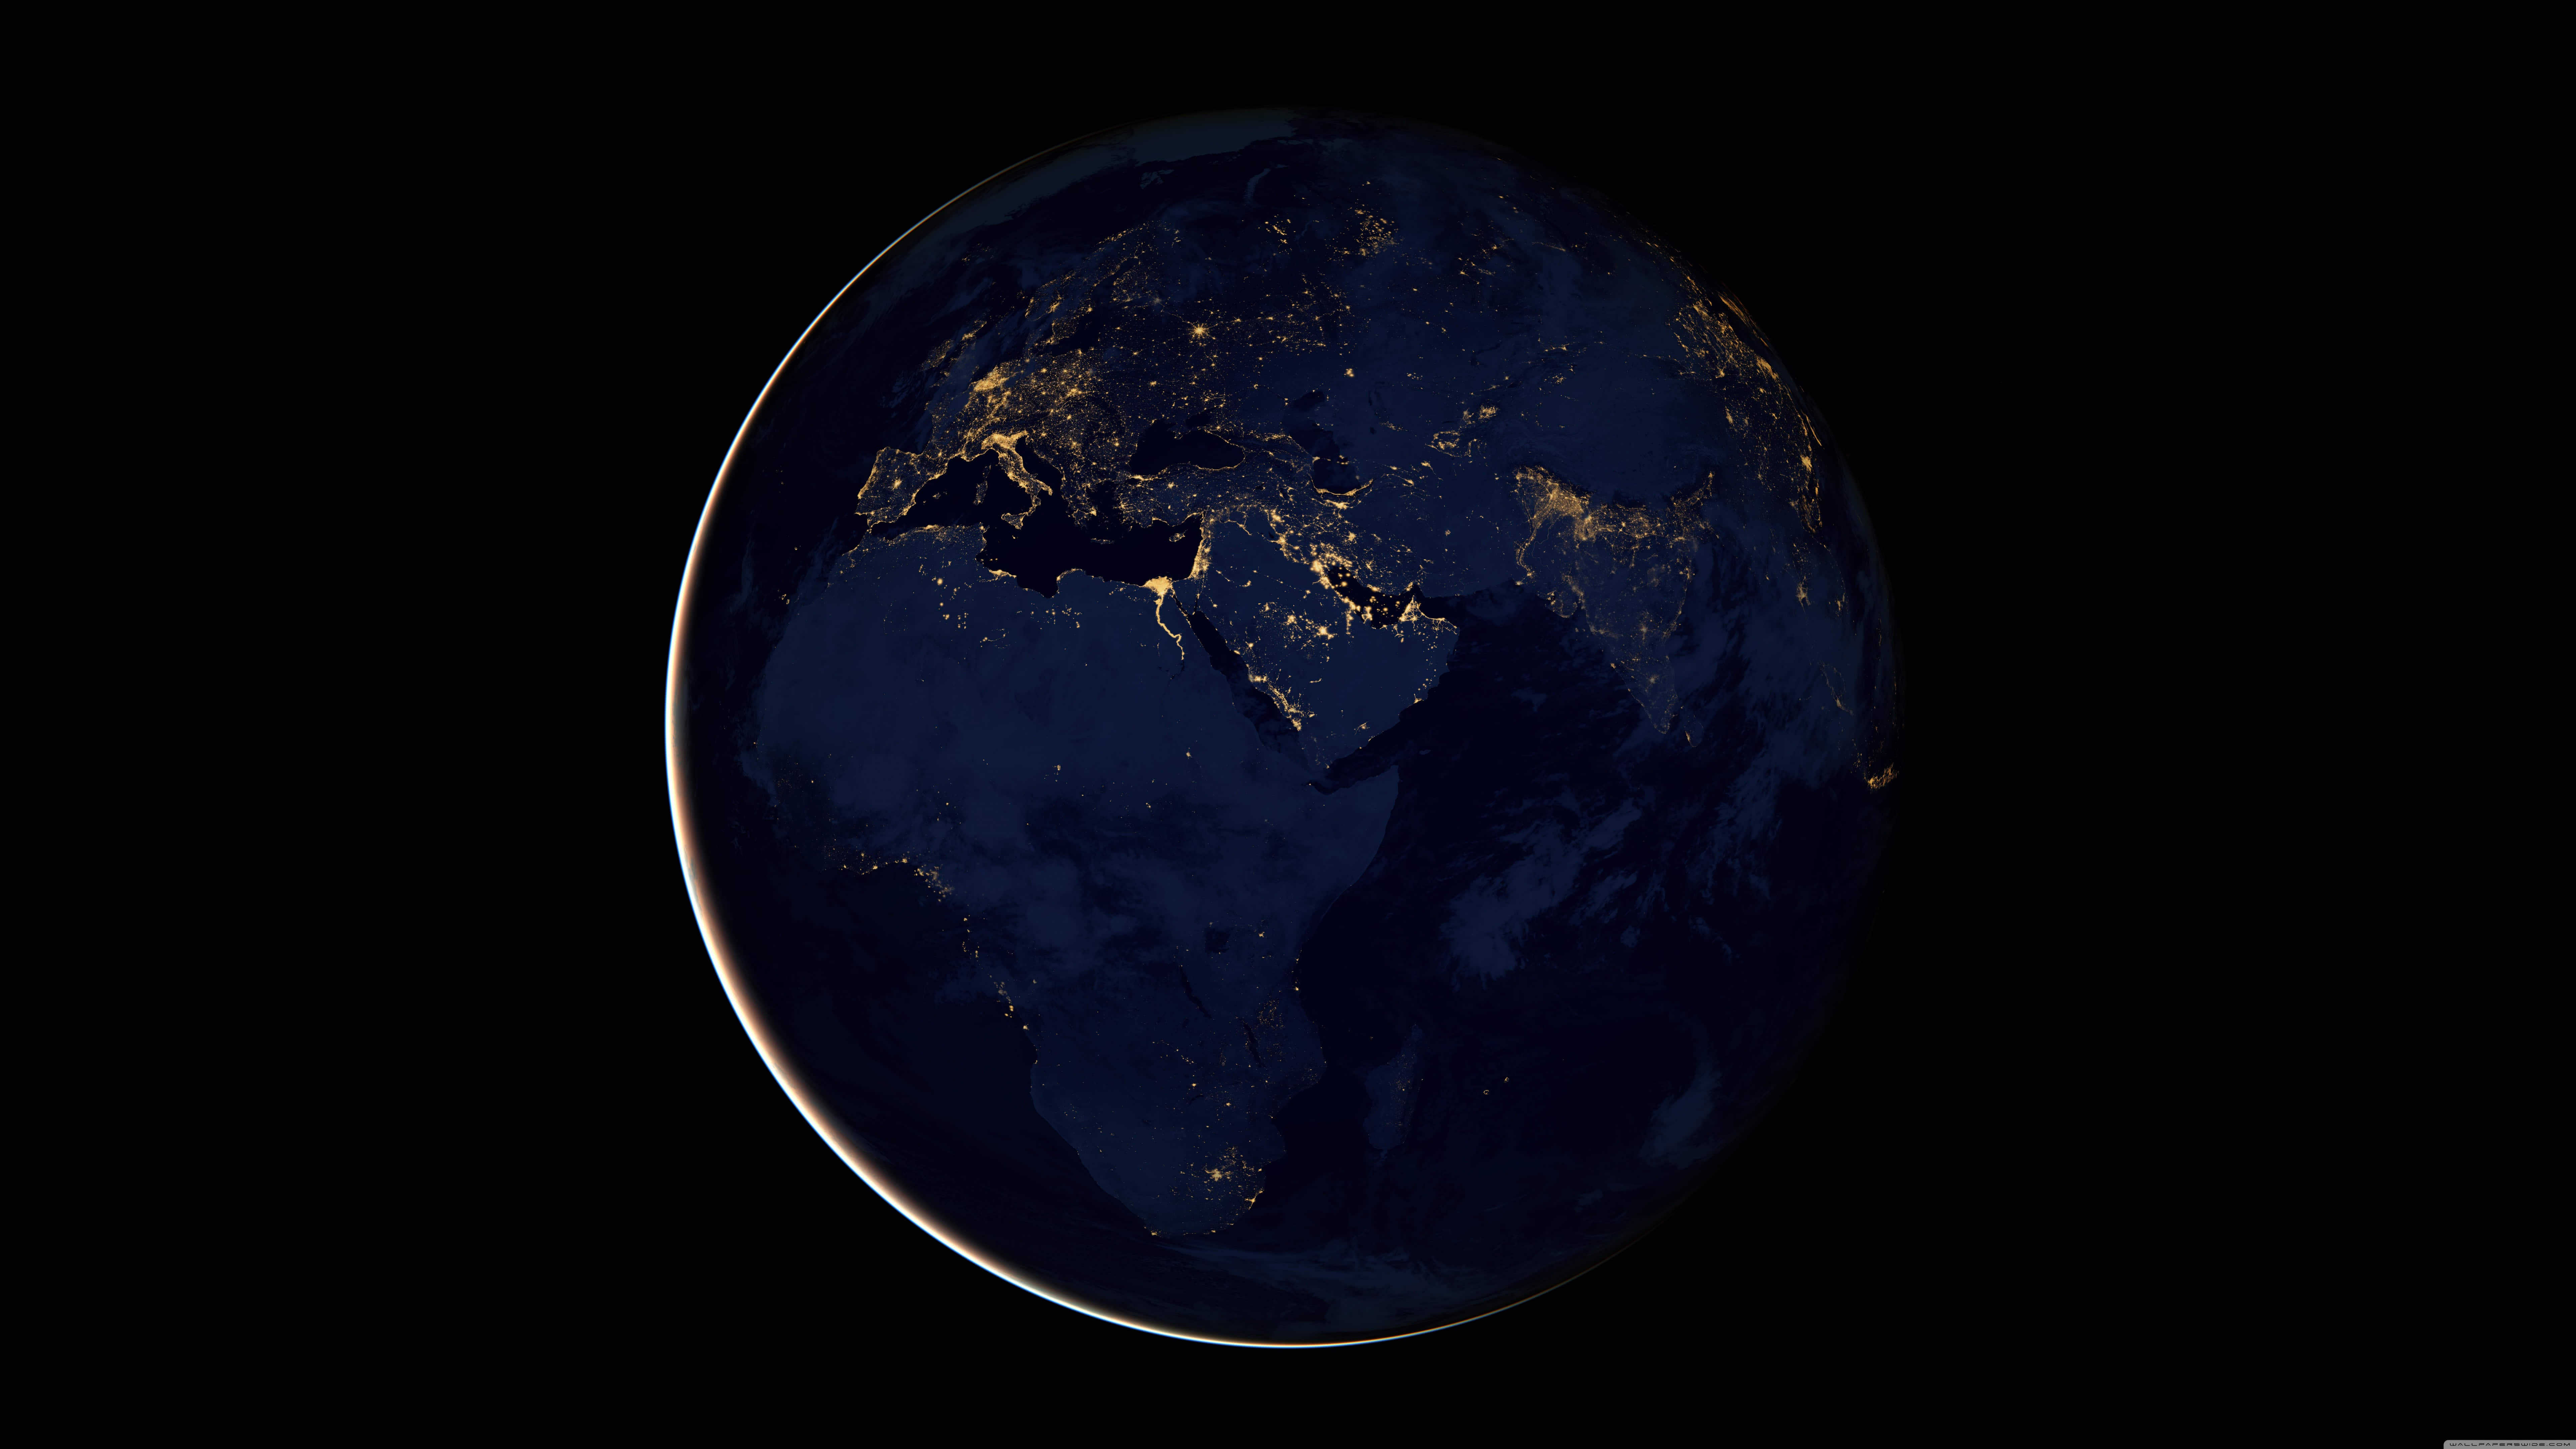 7680x4320 Black Marble Africa Europe And The Middle East Uhd 8k Wallpaper